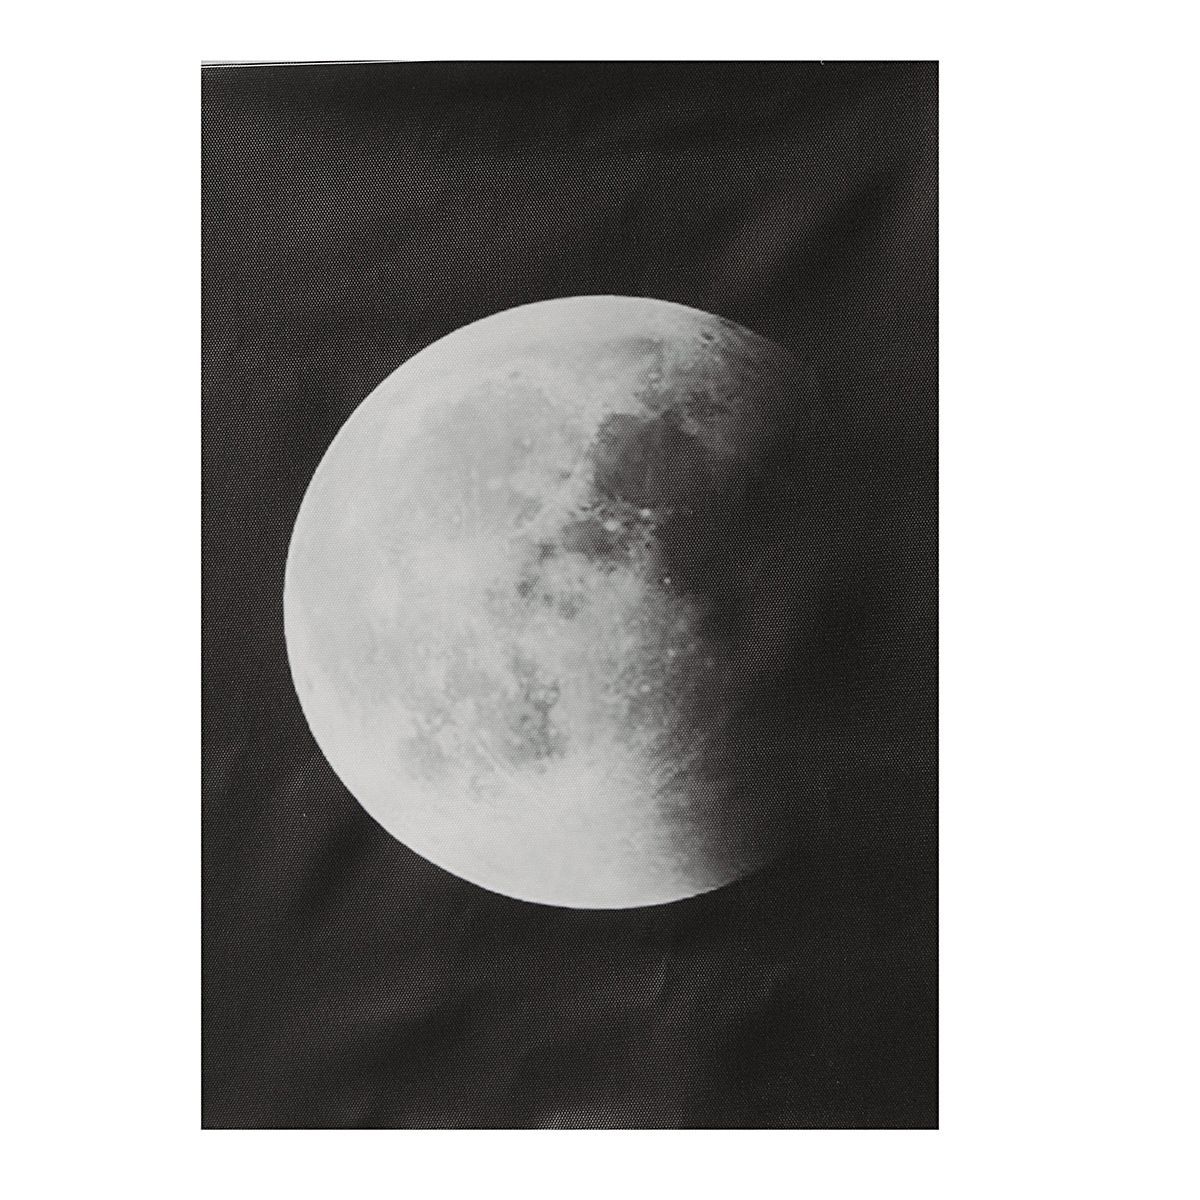 4PcsSet-Moon-Wall-Decor-Poster-Art-Print-Canva-Wall-Picture-Home-Decorations-1466198